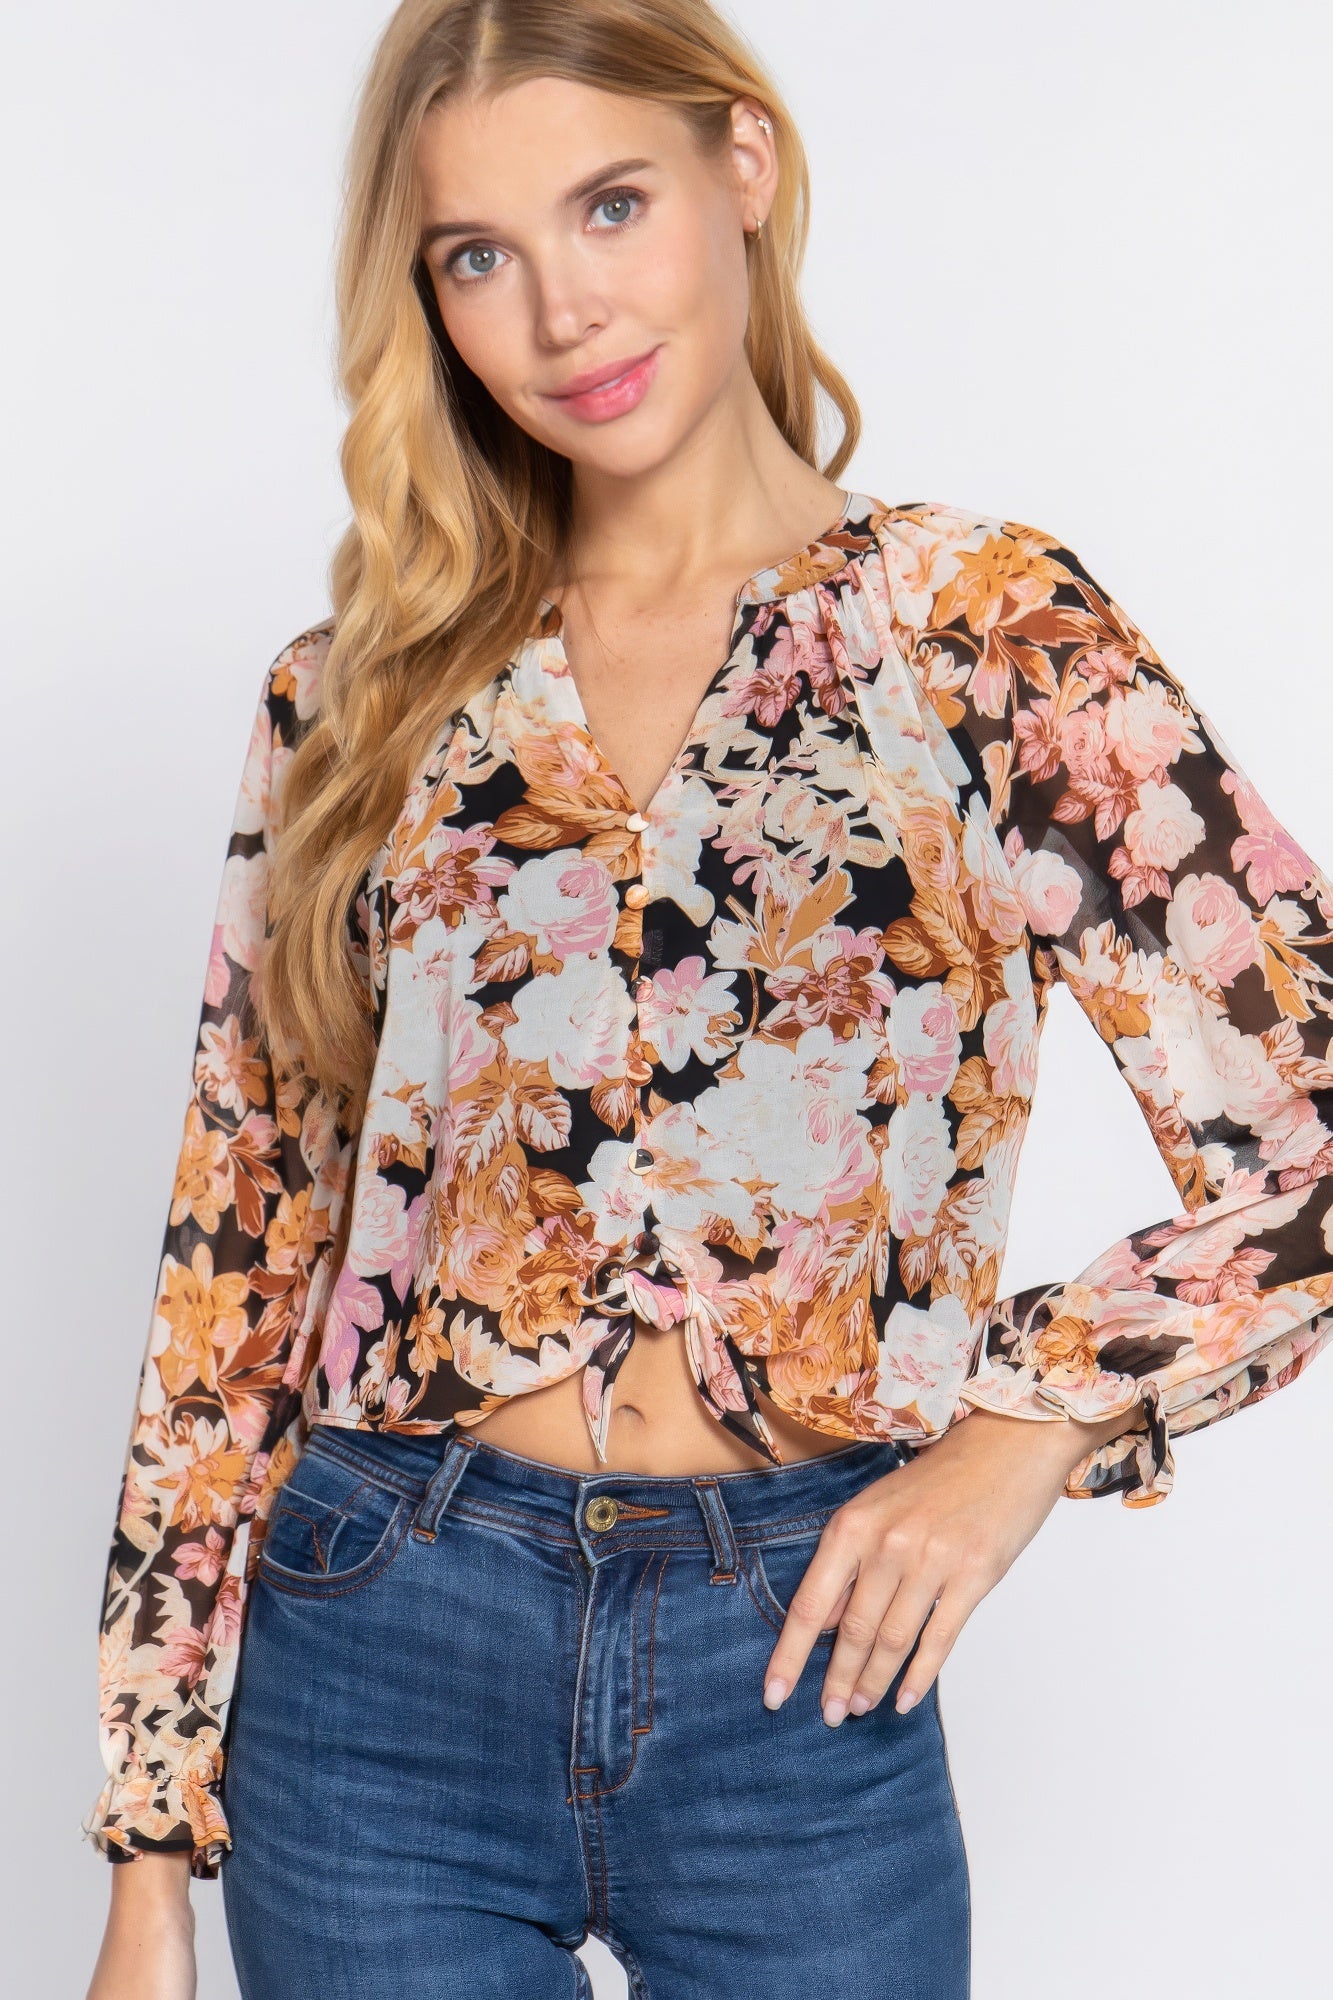 Front Tie Detail Print Woven Blouse - Tigbuls Variety Fashion